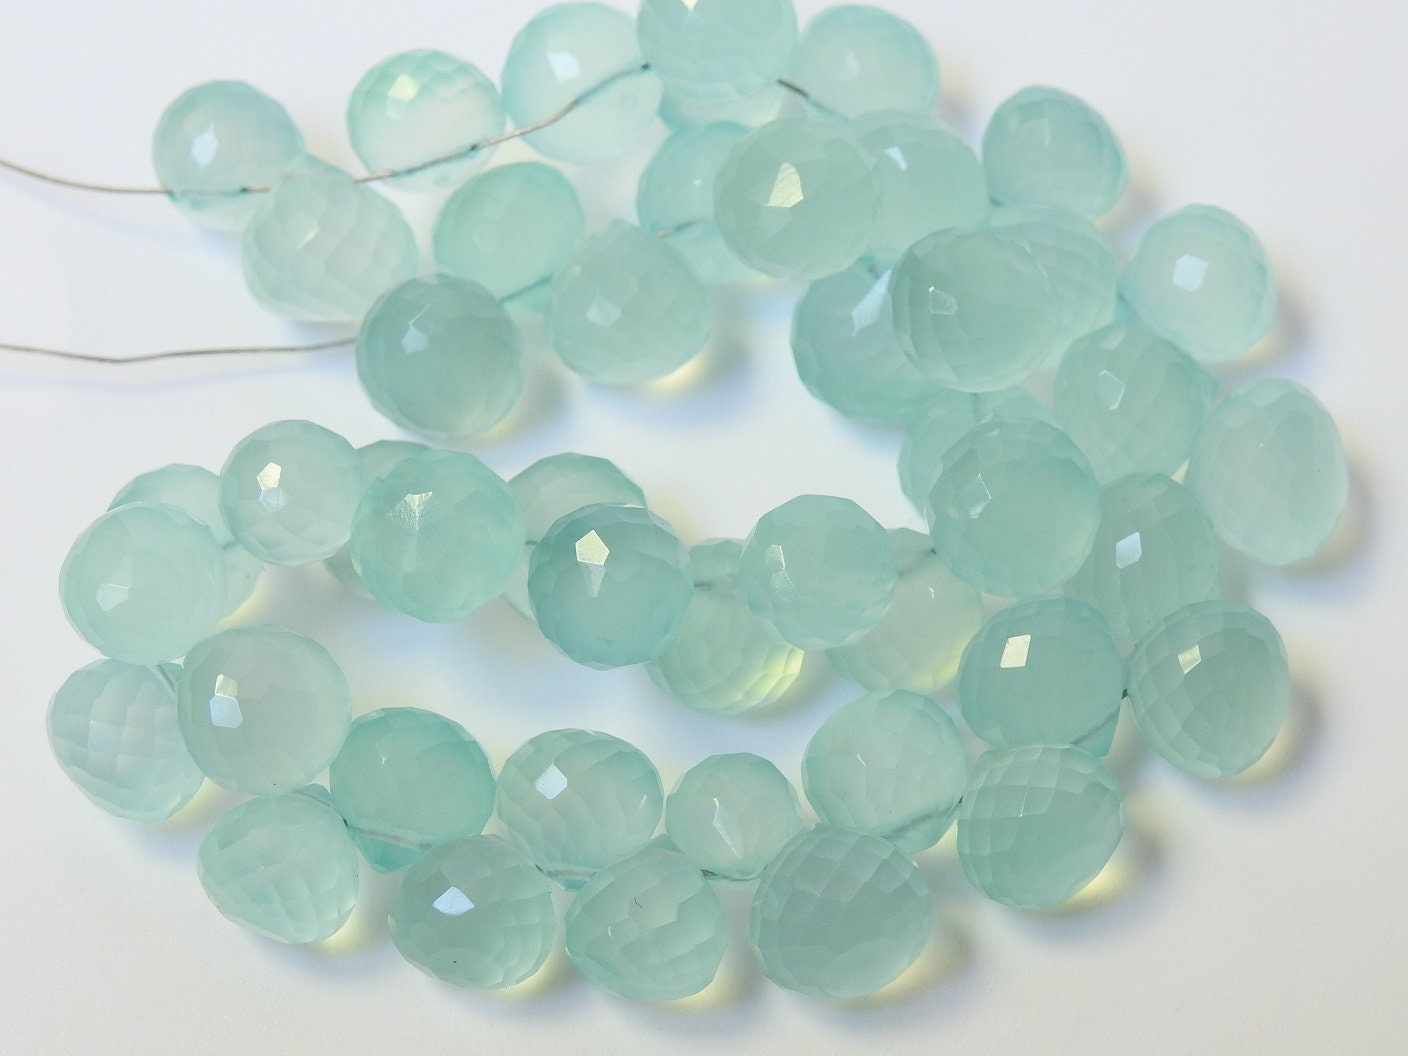 Aqua Blue Chalcedony Faceted Onion Shape,Drop,Teardrop,Briolettes 4Inch Strand 8X8To6X6MM Approx,Wholesaler,Supplies,New Arrivals PME-CY2 | Save 33% - Rajasthan Living 13